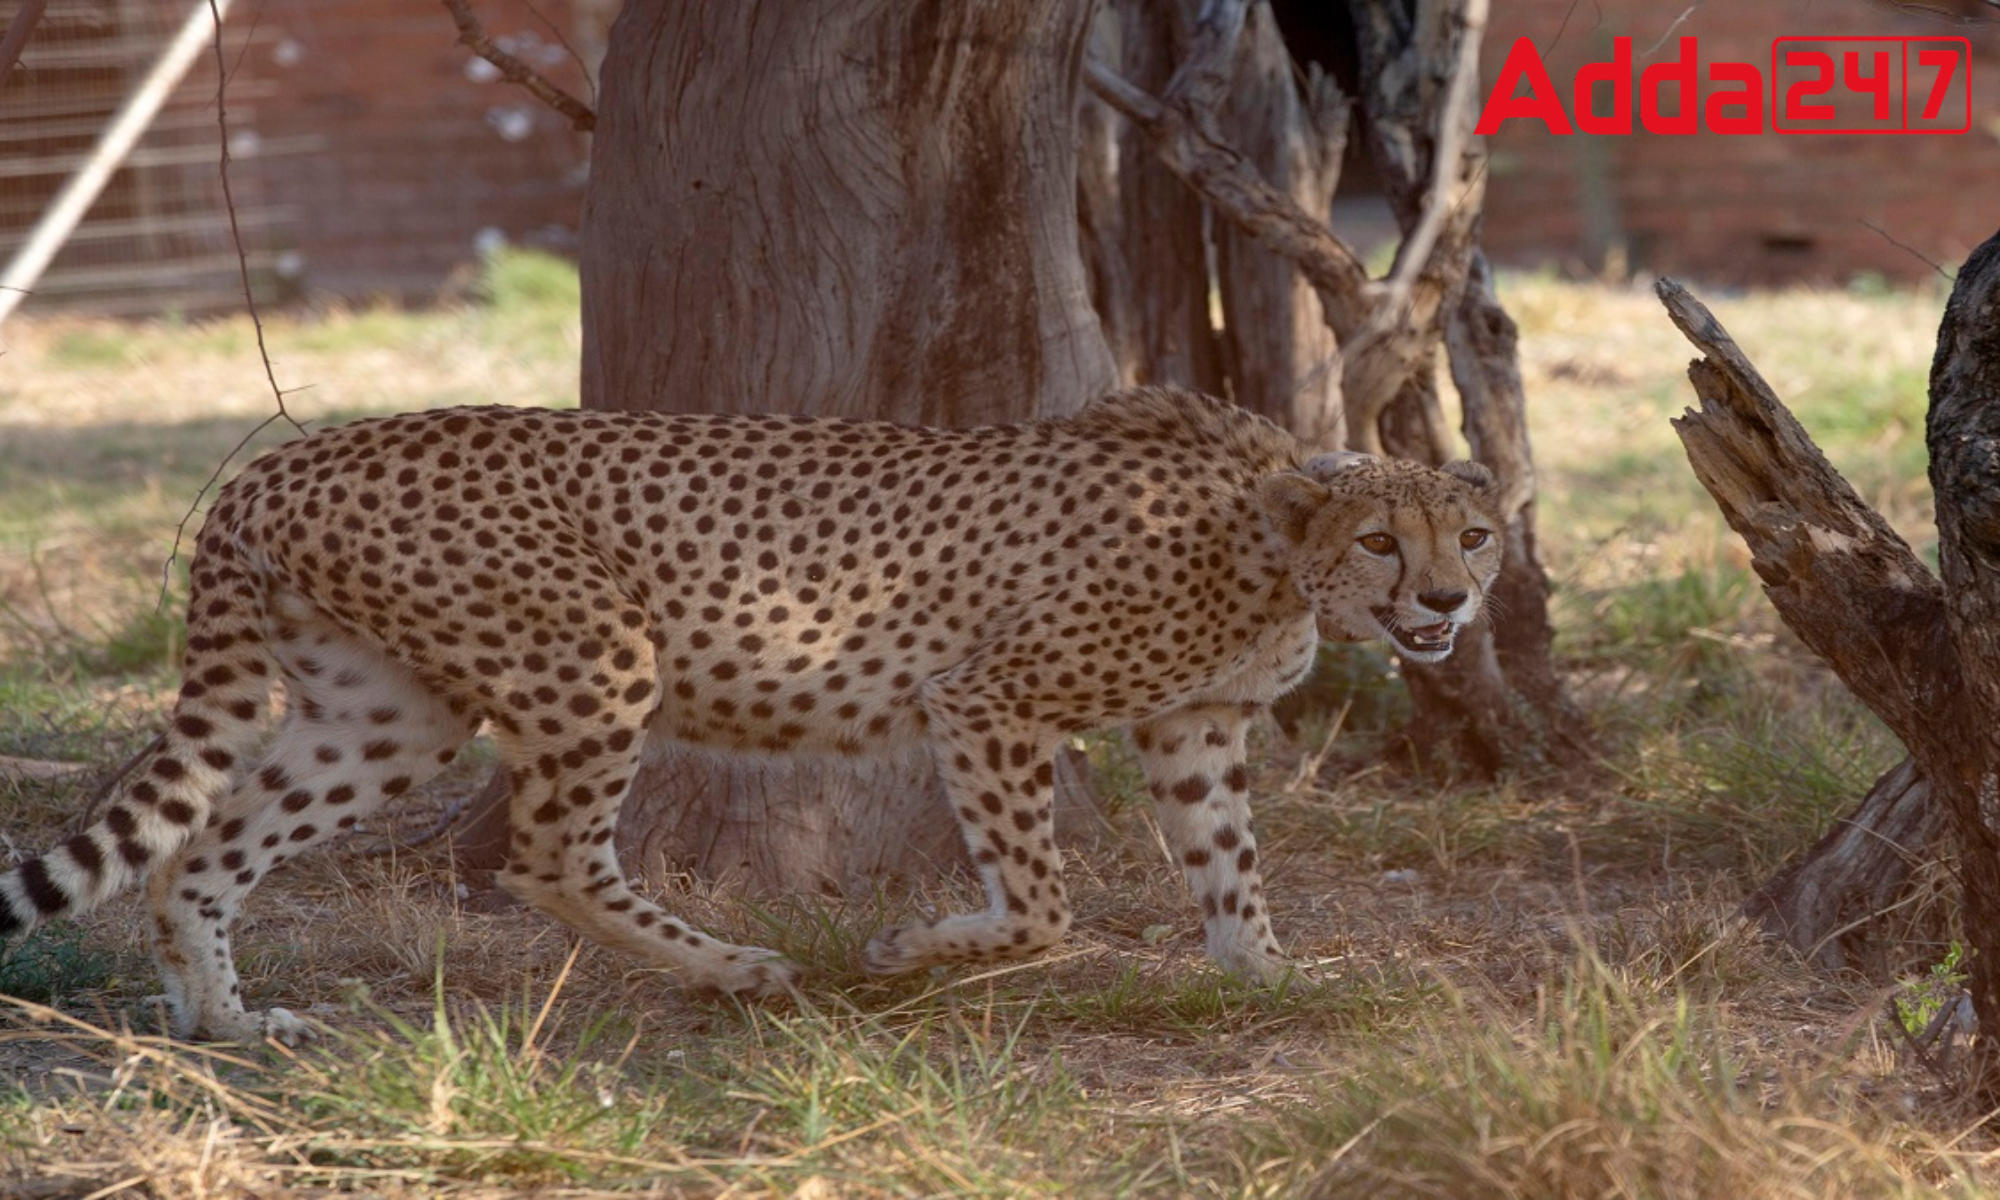 Cheetah Introduction Project Monitoring: Centre set up 9-member task force_30.1